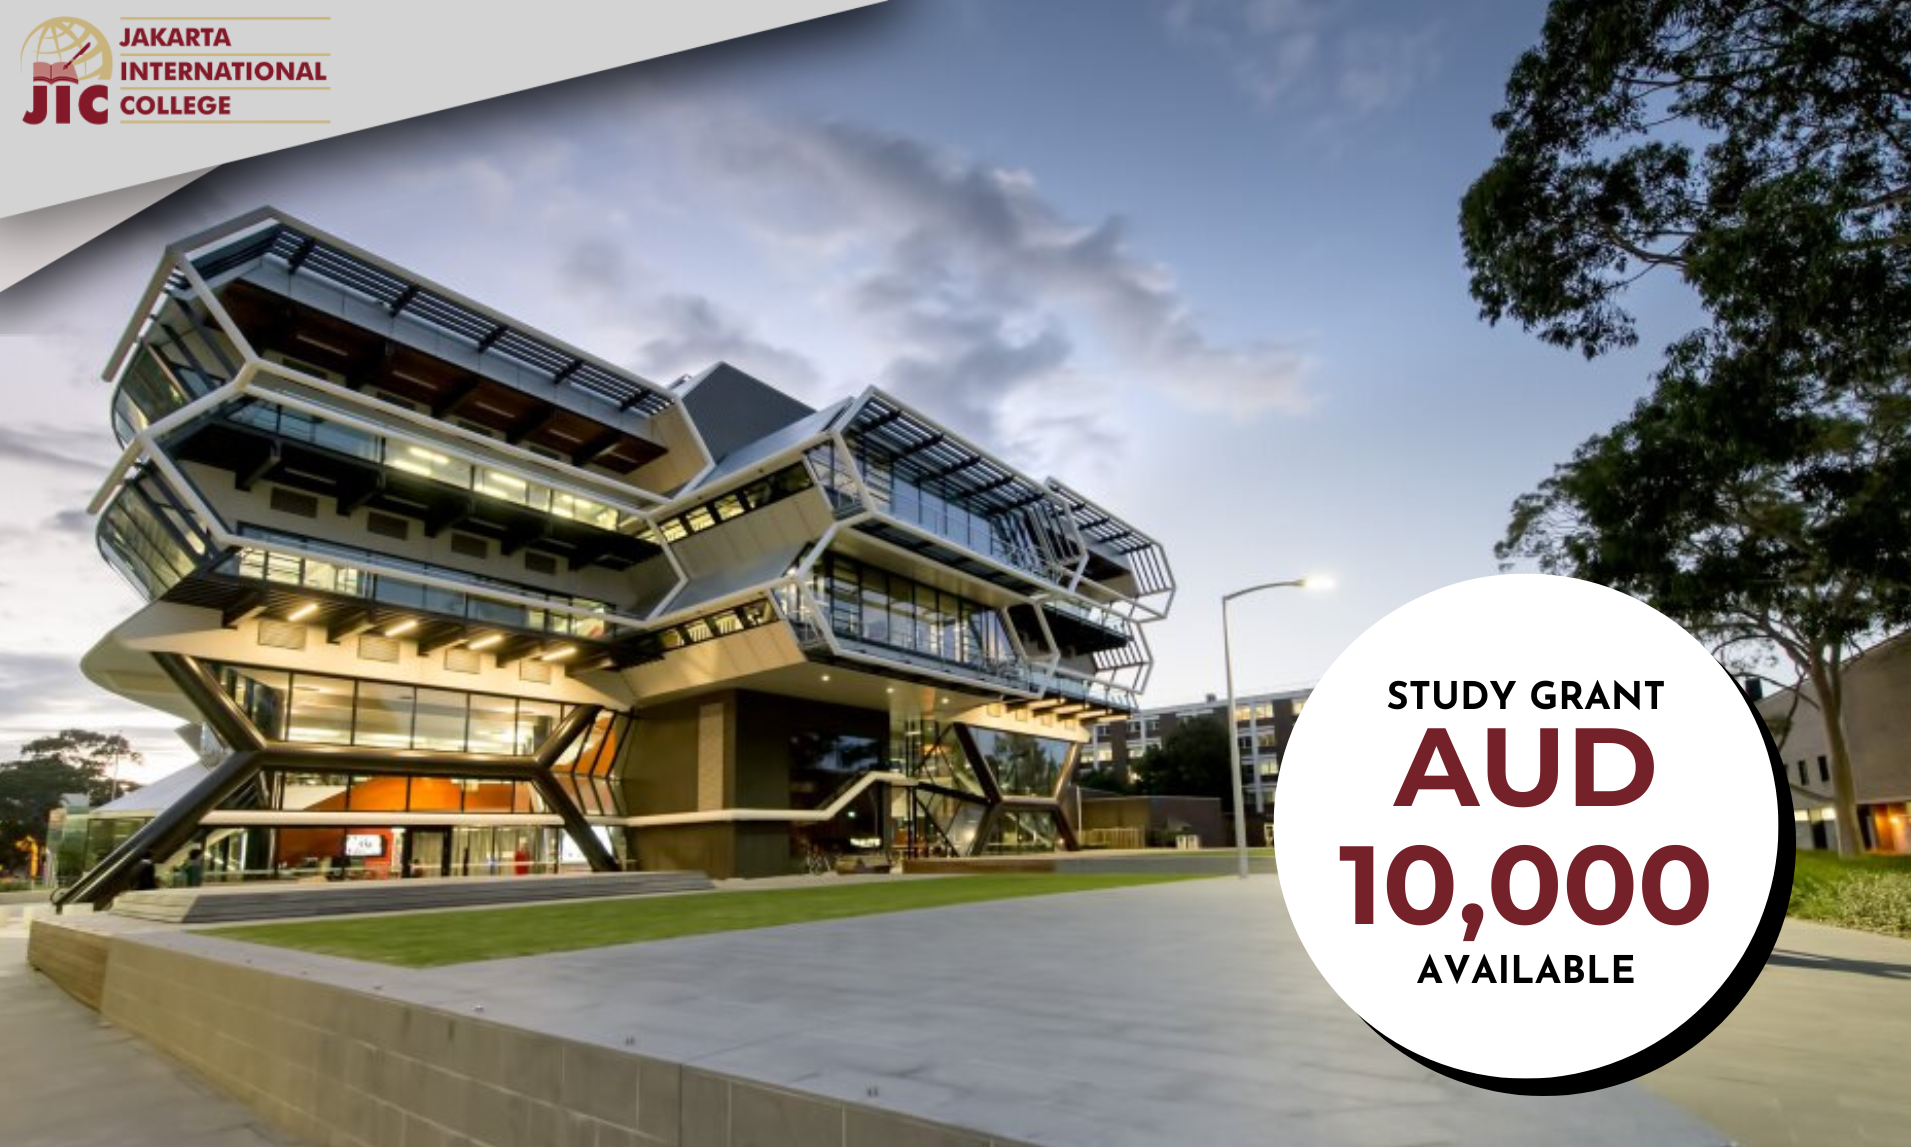 Exclusive AUD 10,000 Study Grant for JIC Students by Monash University!